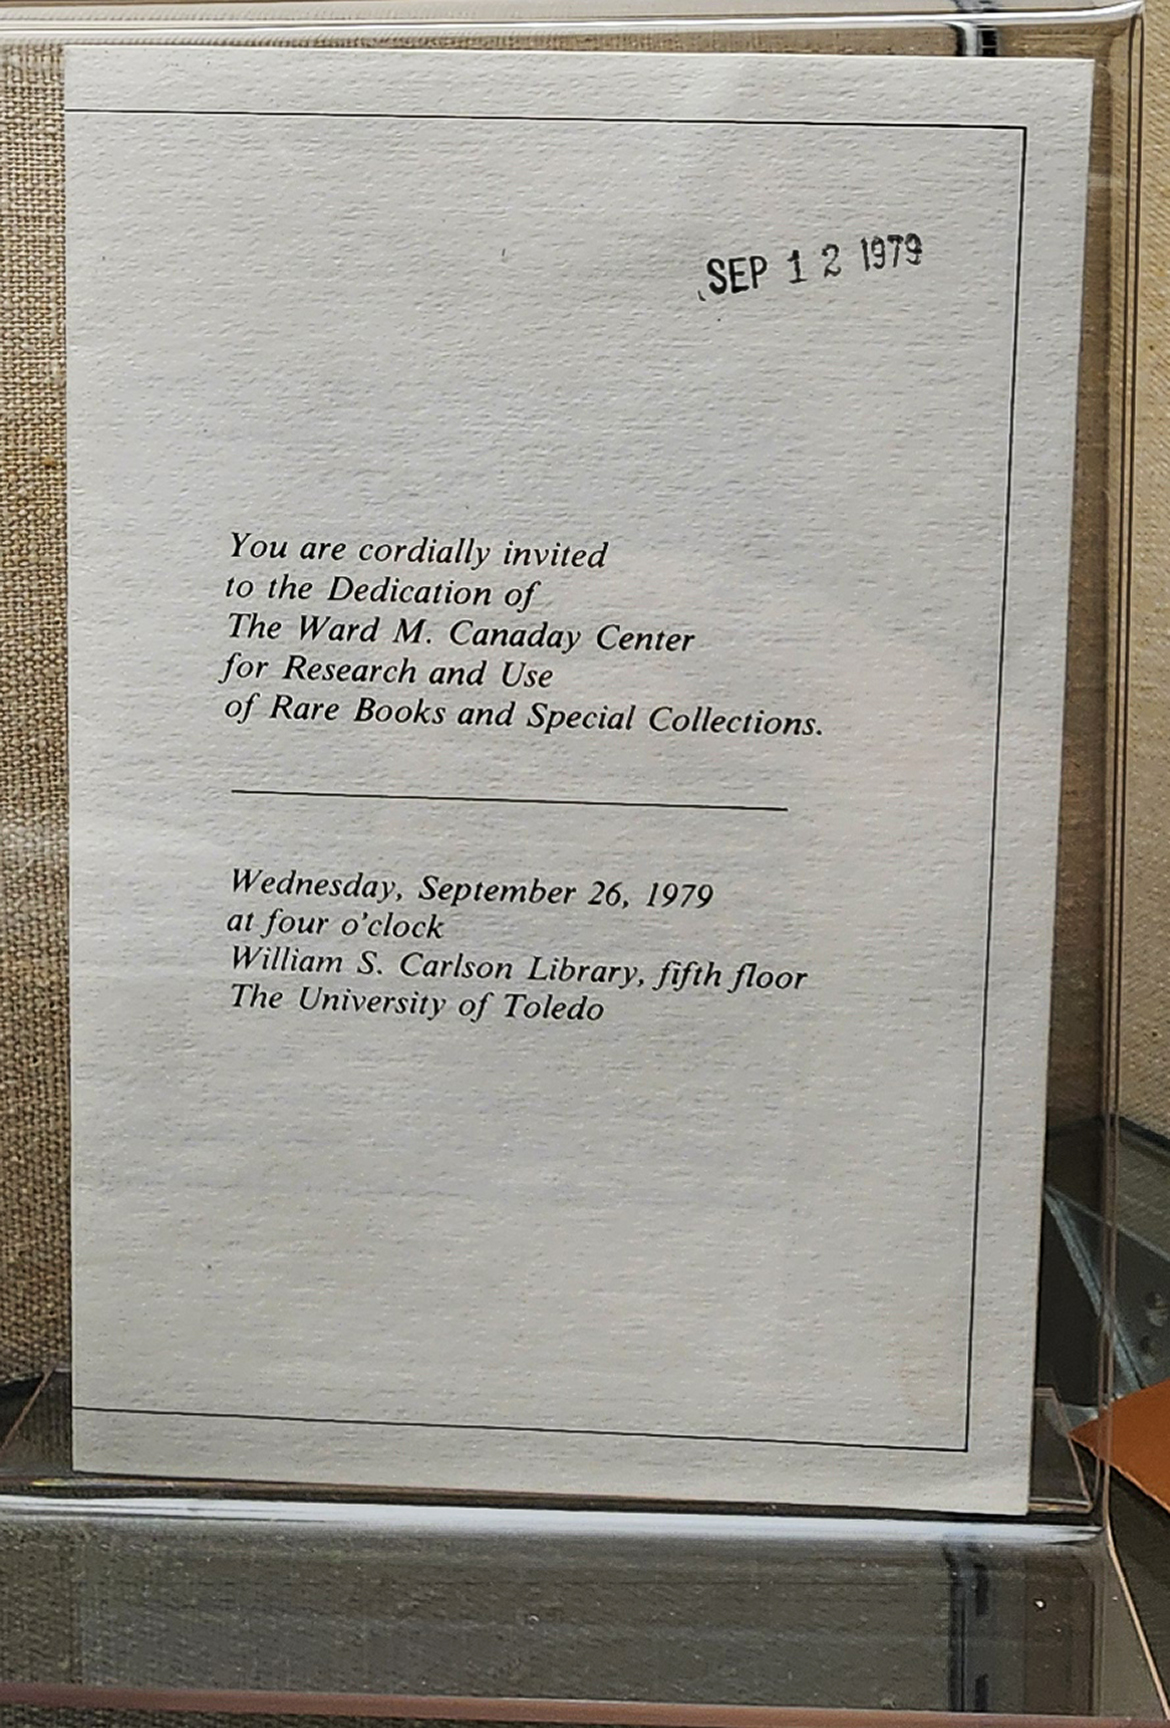 Invitation to the Dedication to the Wrd M. Canaday Center, September 26, 1979